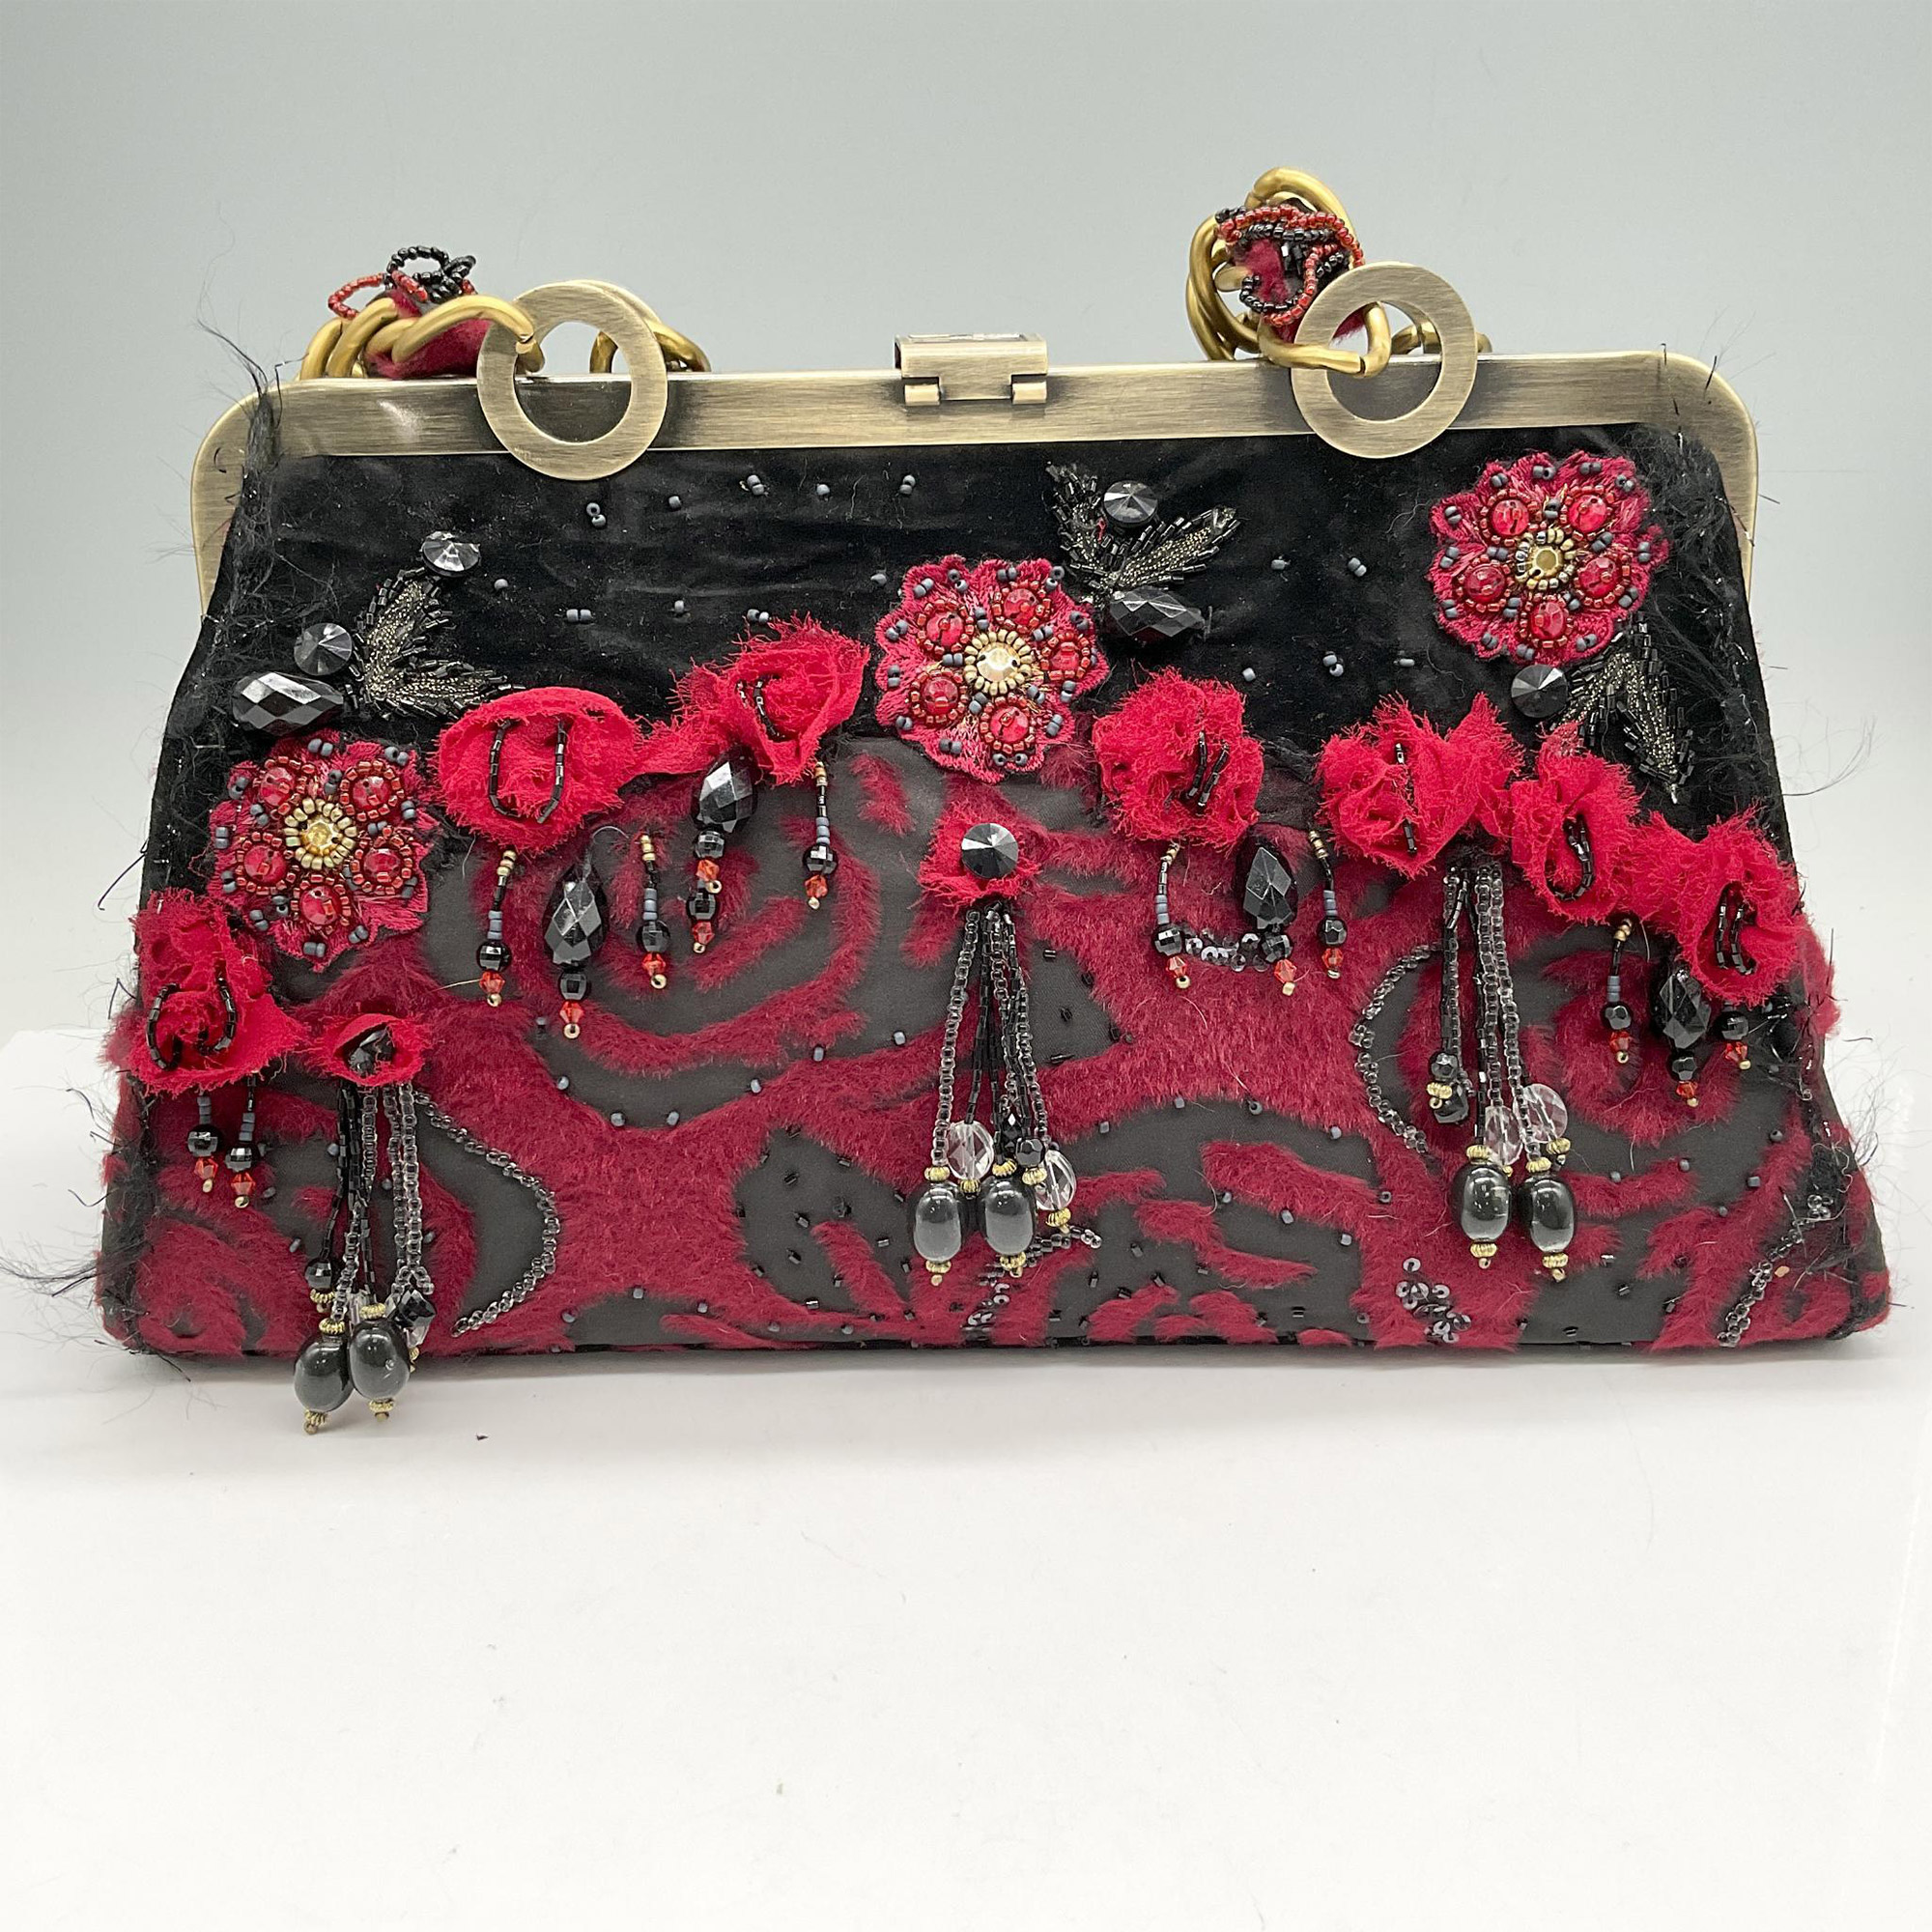 Mary Frances Handbag, Roses are Red - Image 2 of 4